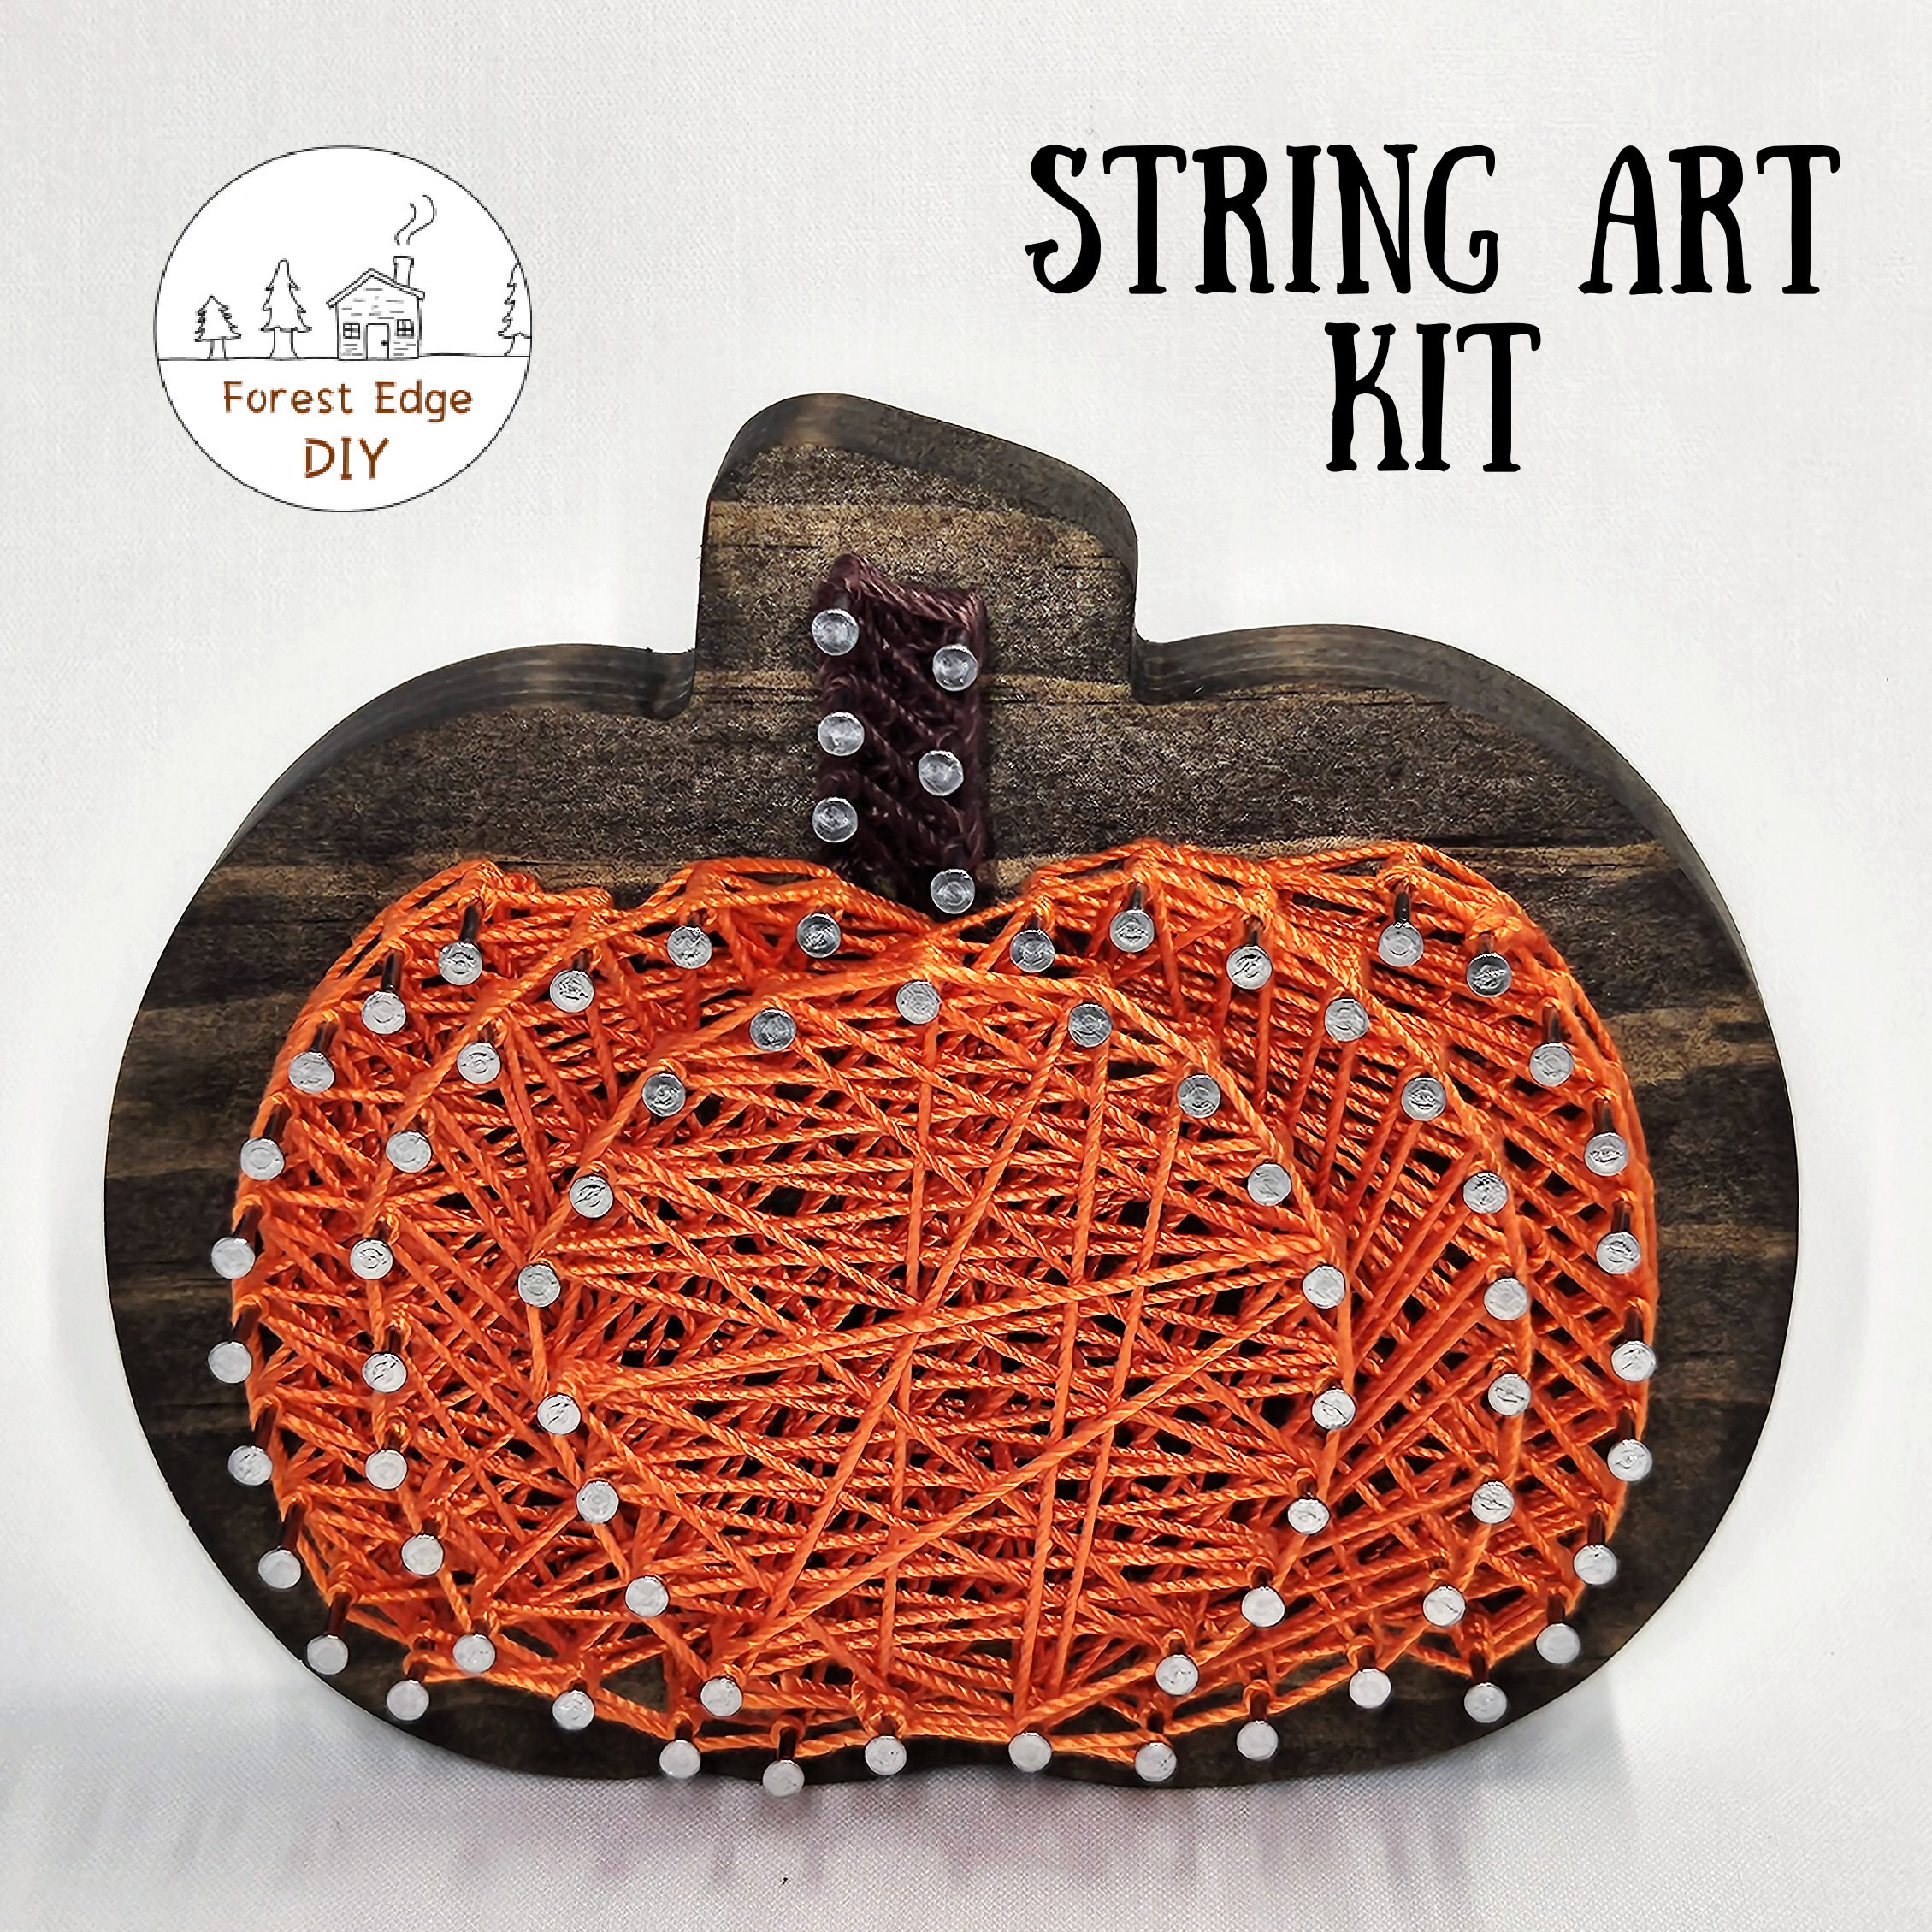 Wood Stitched String Art Kit with Shadow Box Cube - adult or kids craft -  craft kits for teens - string art kit for adults - 3d string art - 3d string